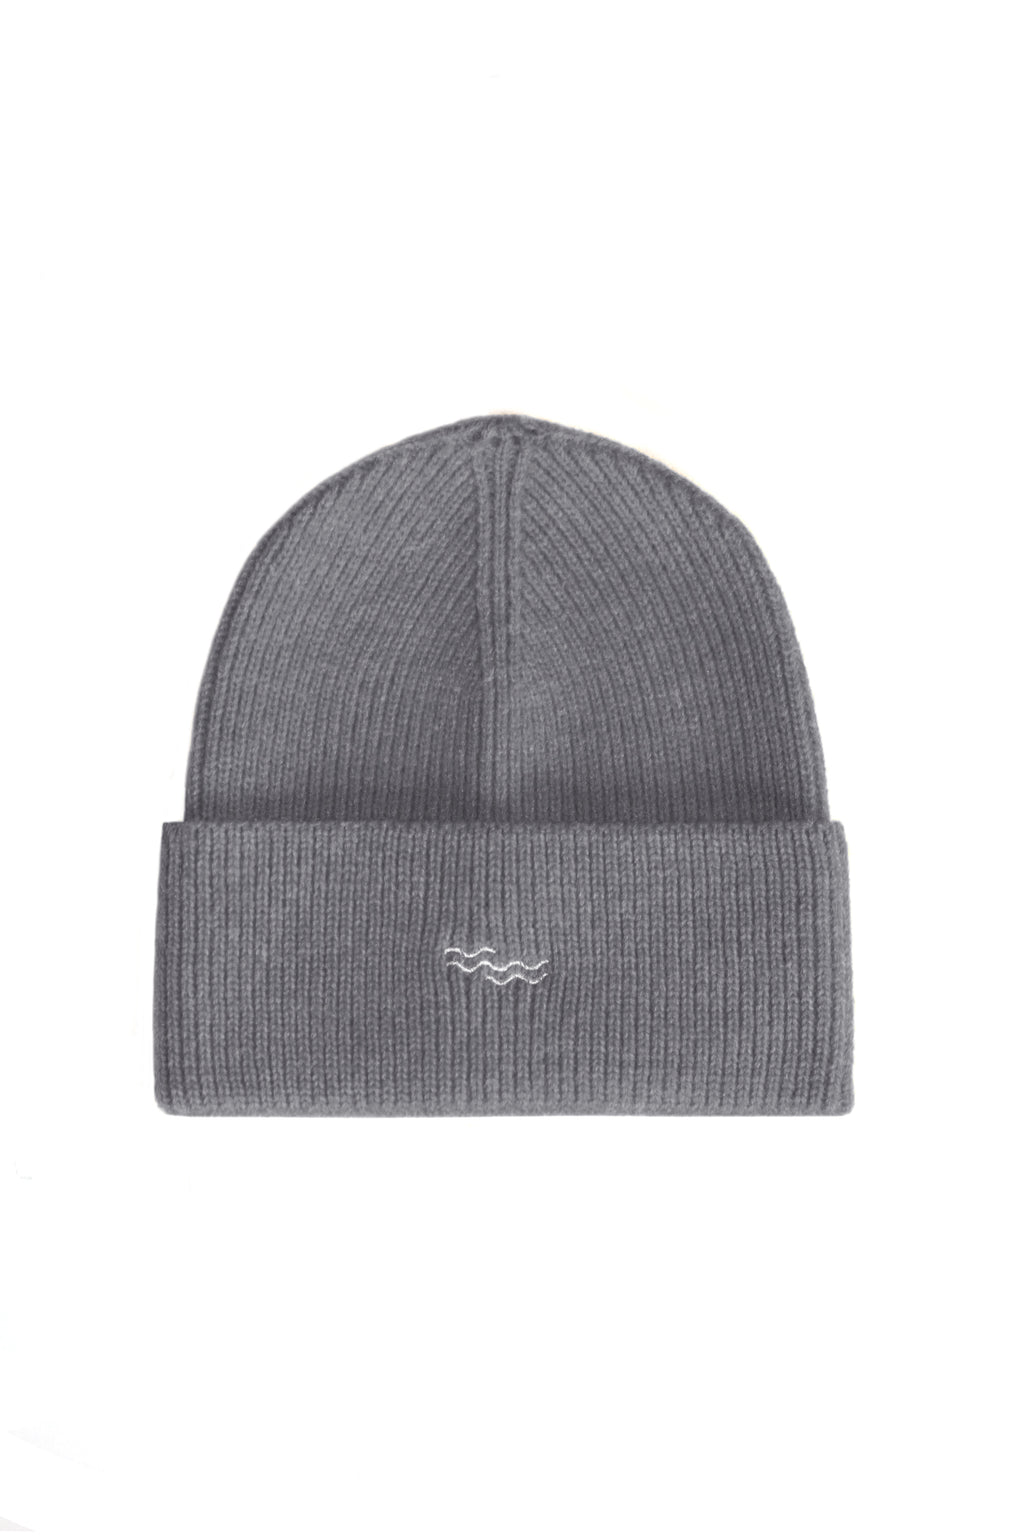 ICEICE KNITTED BEANIE